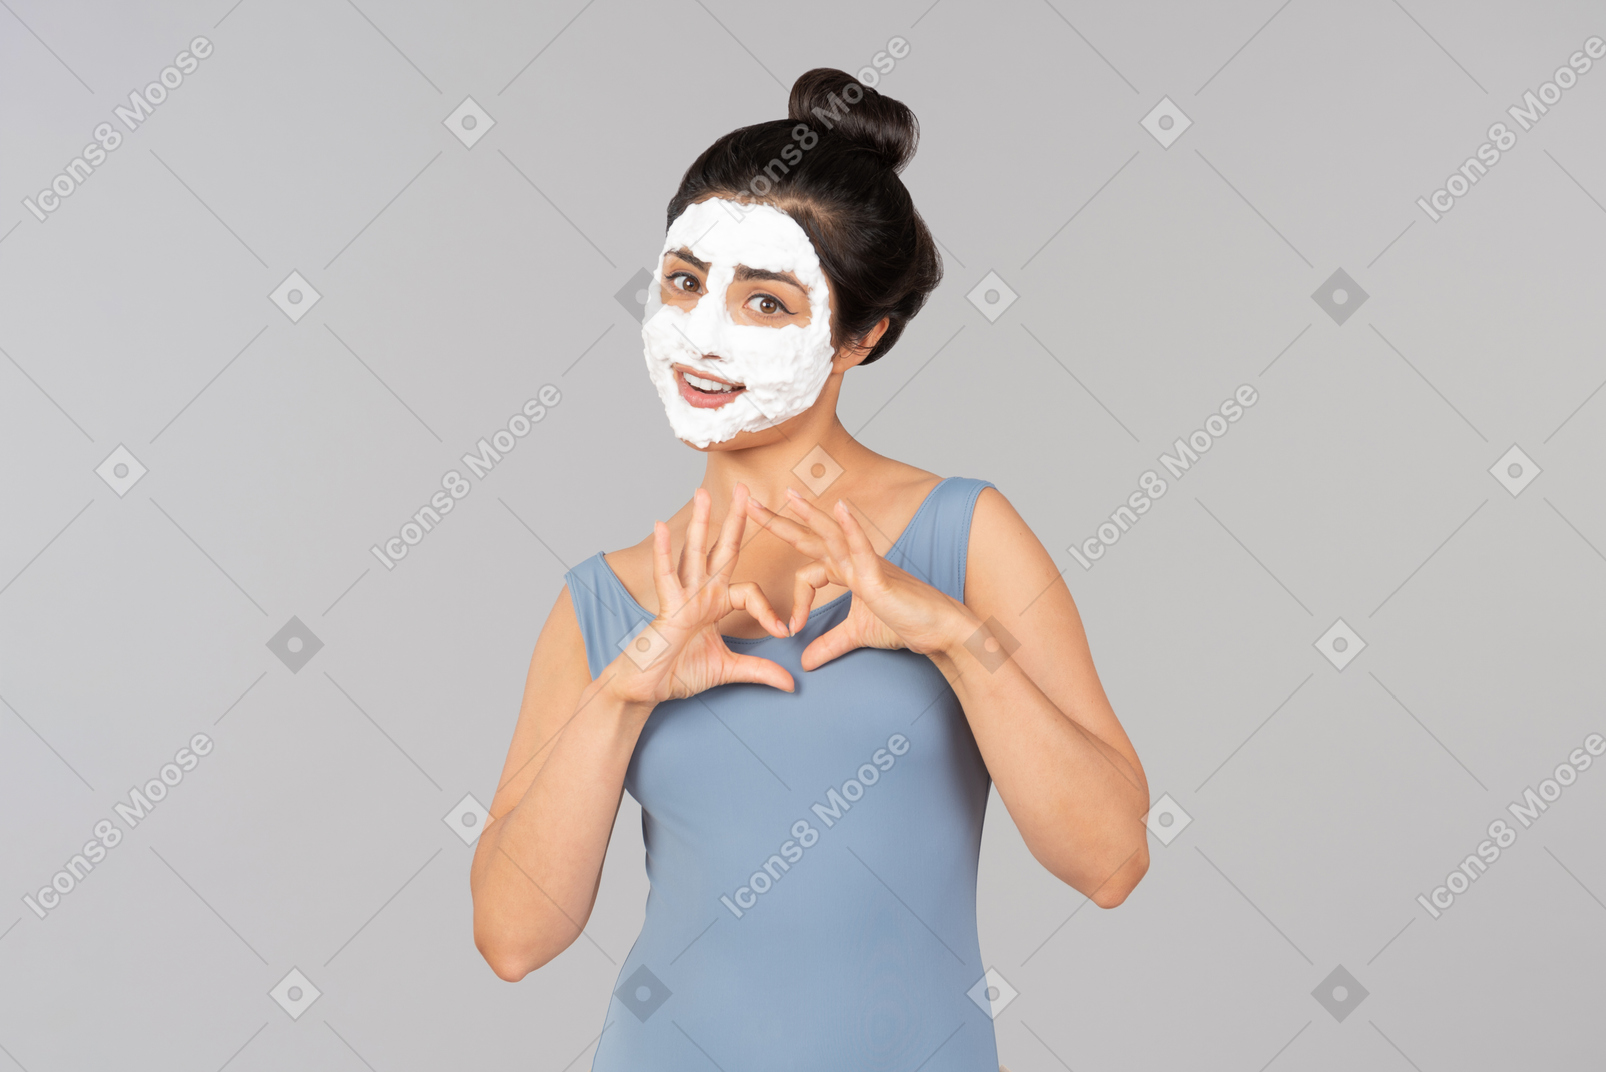 Woman with white mask on sending air kisses